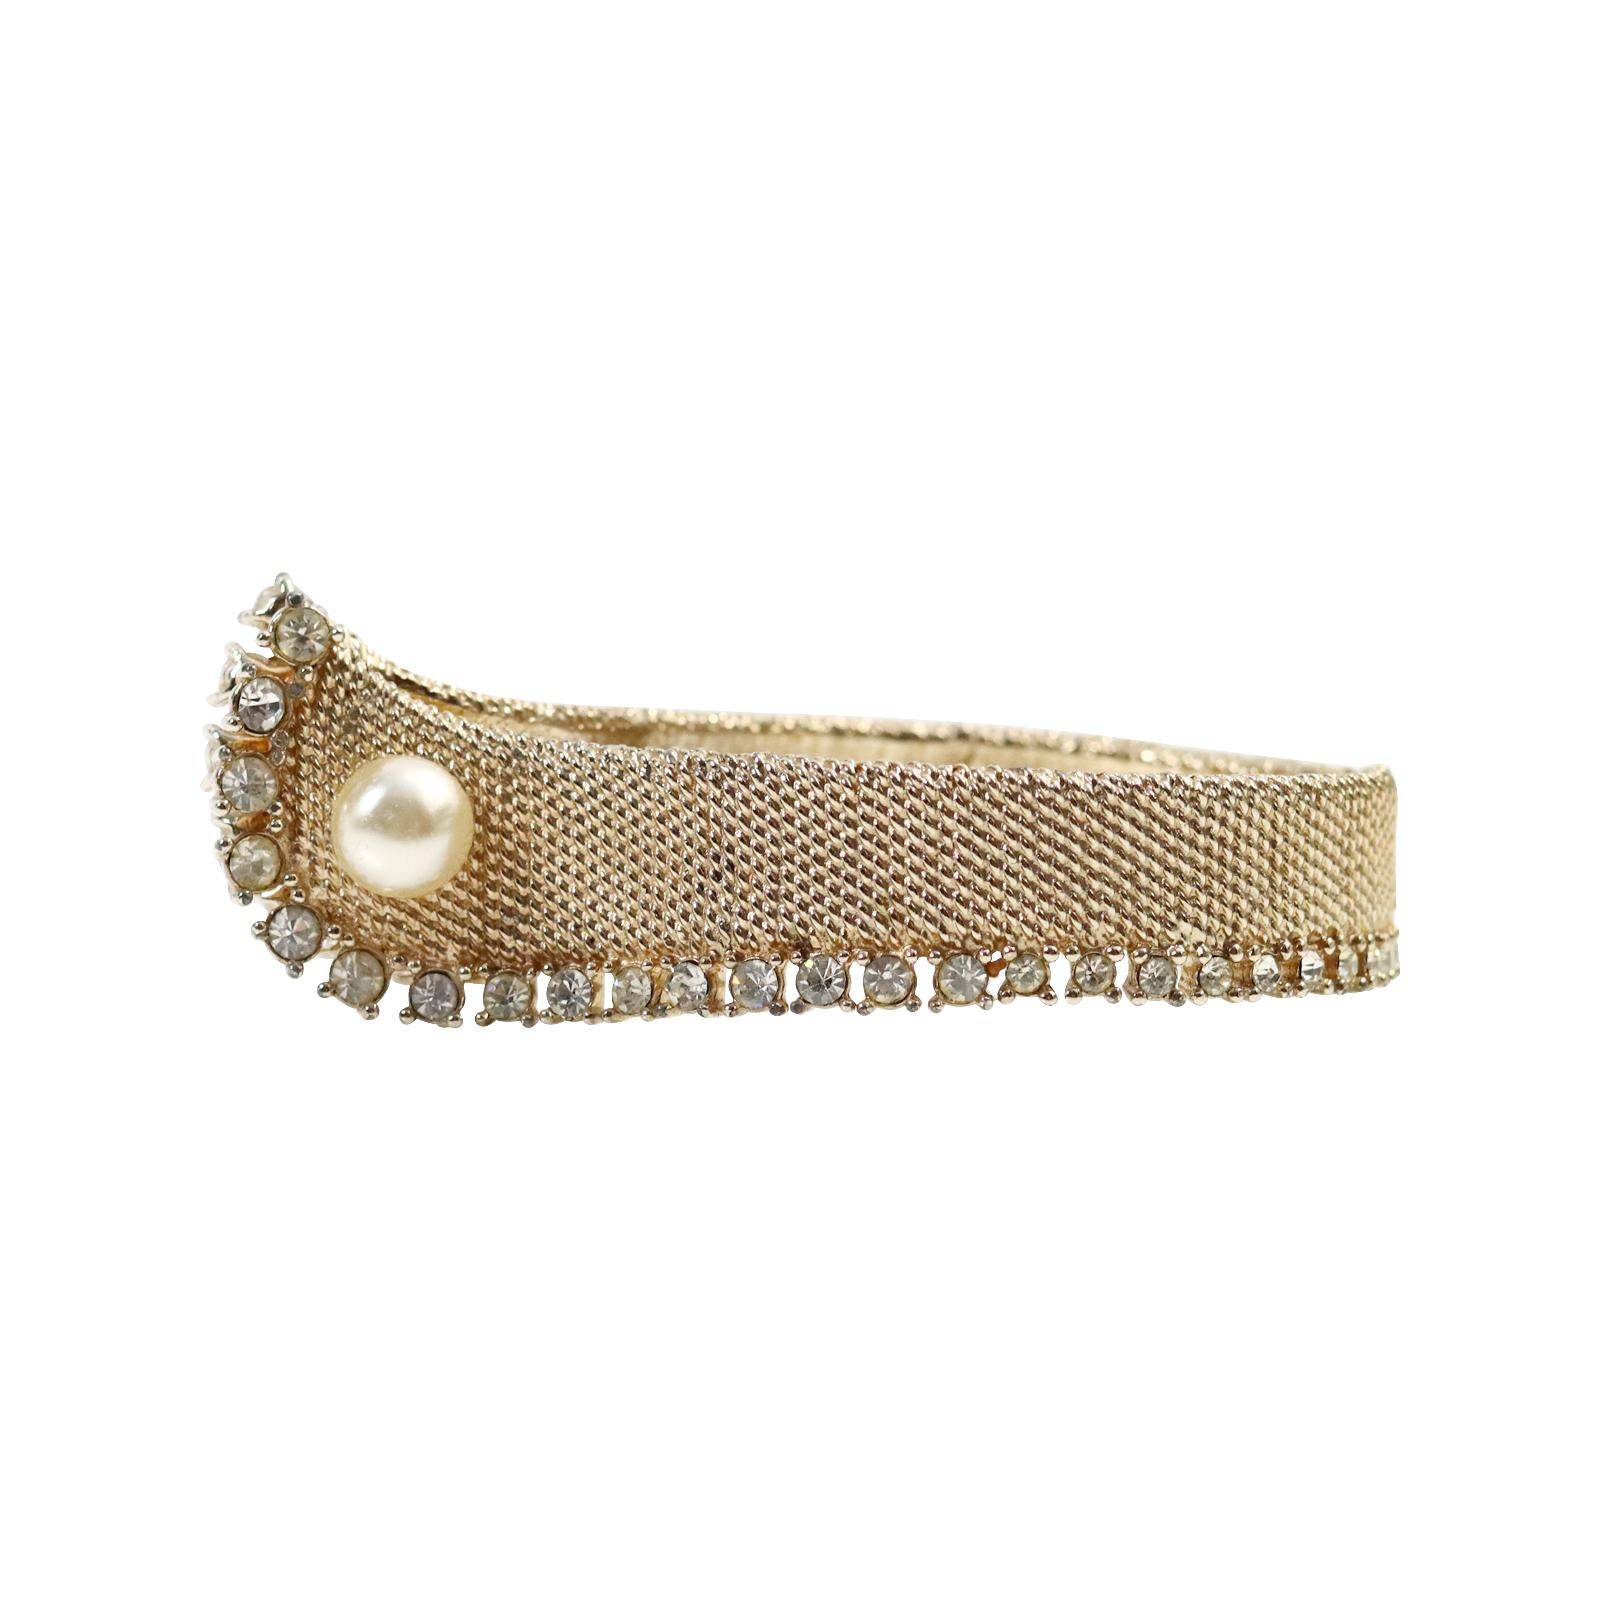 Vintage Marvella Gold Tone with Diamante and Faux Pearl Cuff Circa 1960s. This is one of the unusual cuffs I have ever seen.  It looks like a cuff at the bottom of  a shirt and is sure to be a show stopper and a conversation piece.  It closes with a